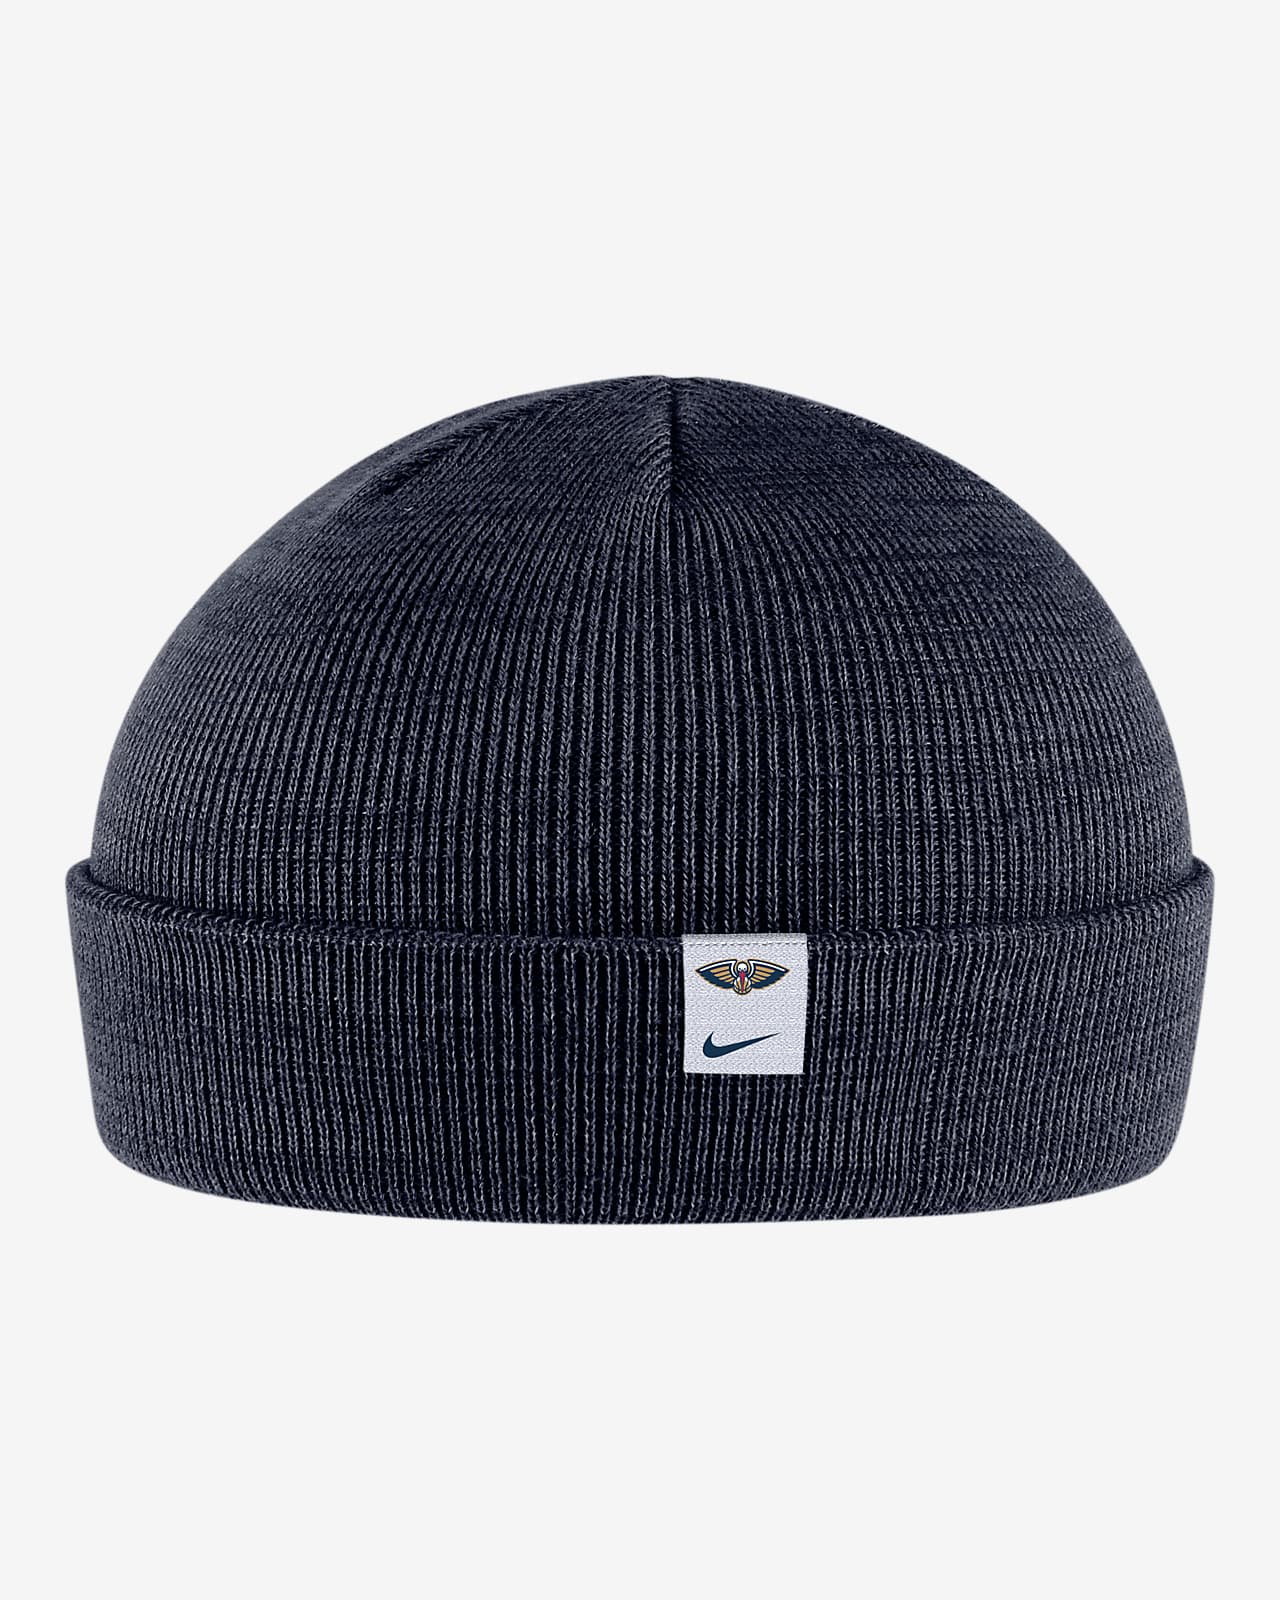 New Orleans Pelicans Icon Edition Nike Fisherman Beanie